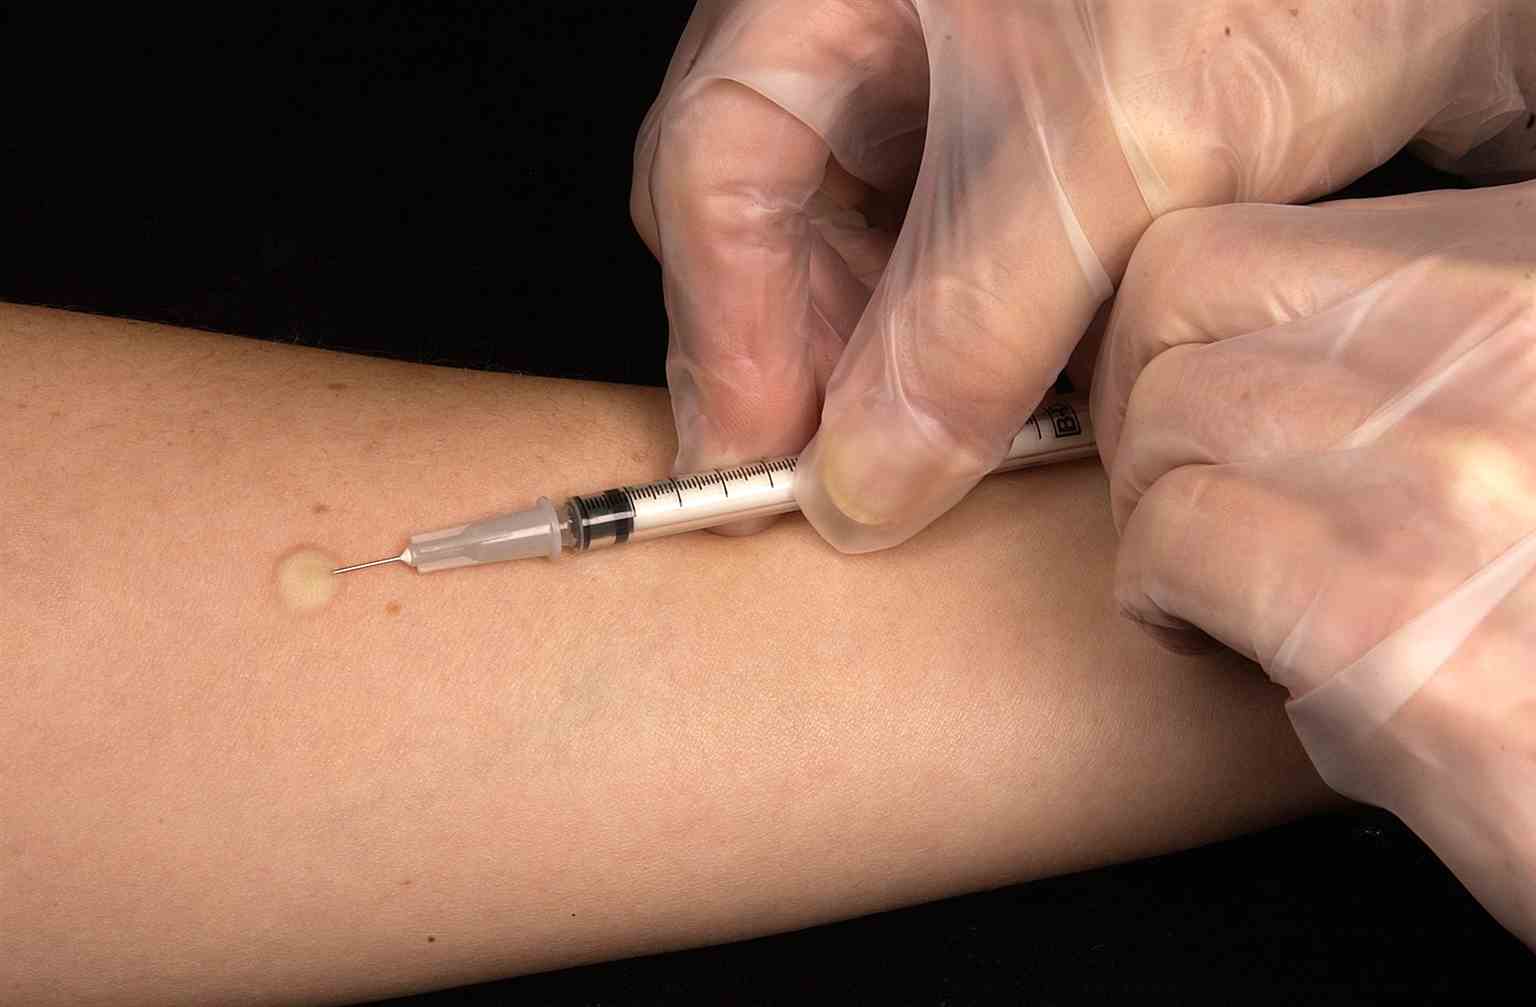 This technician is in the process of correctly placing a Mantoux tuberculin skin test in this recipient’s forearm, which will cause a 6mm to10mm wheal, i